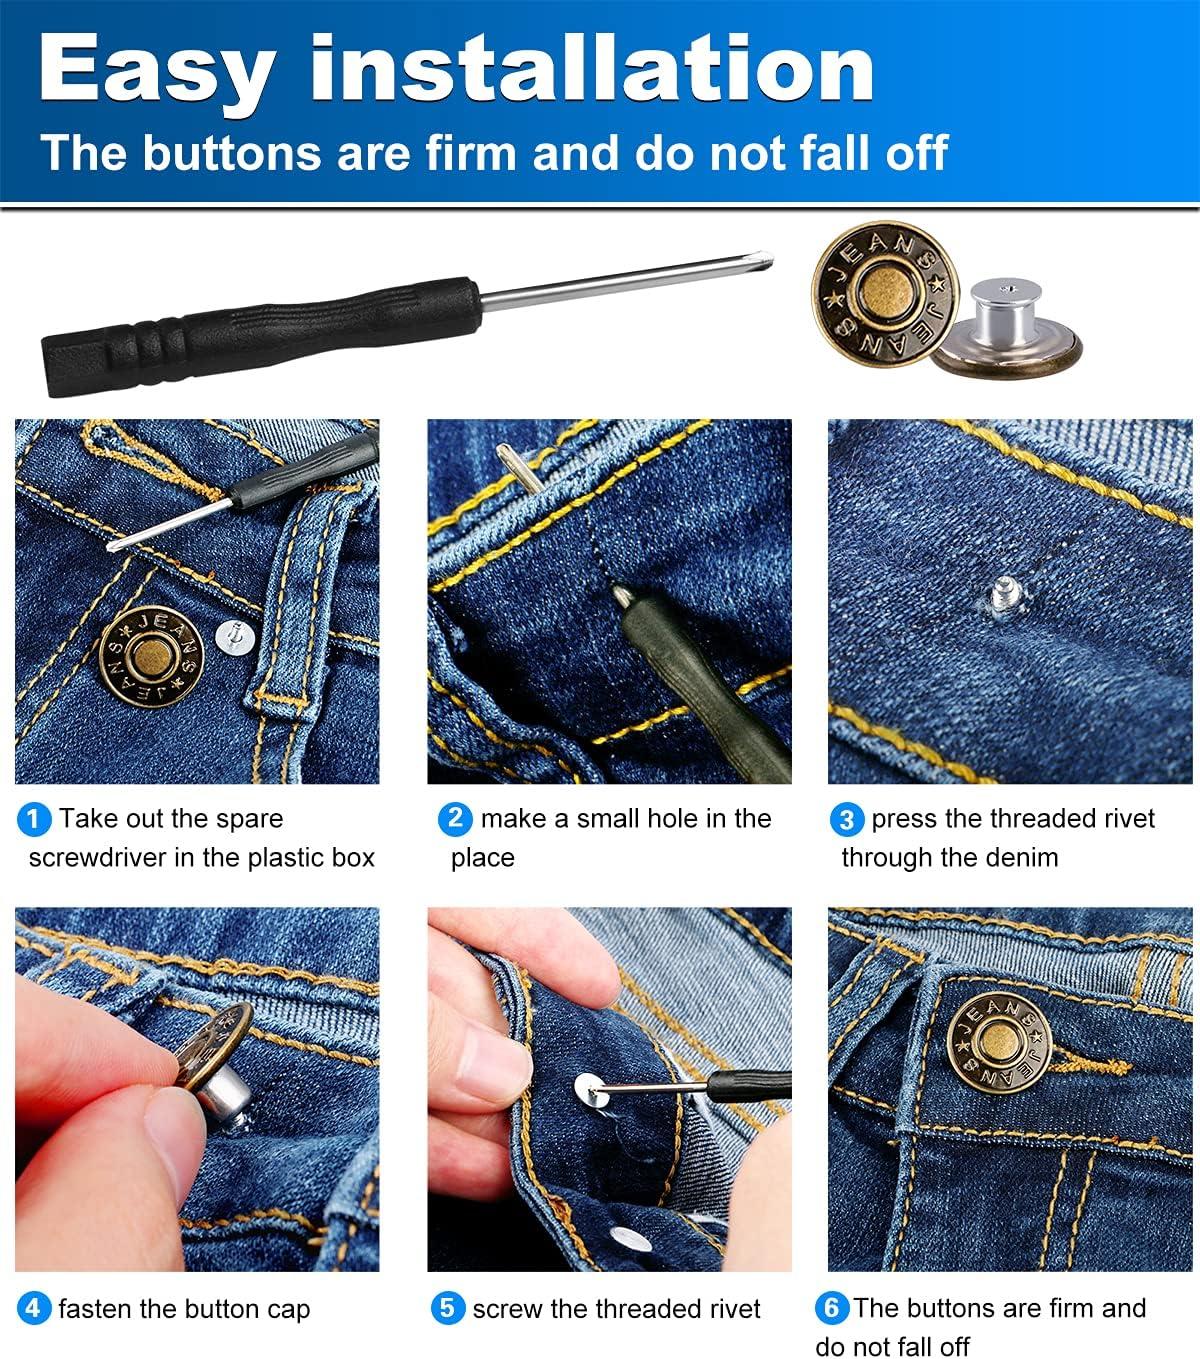 Jean Buttons Replacement No Sew Needed, 8 pcs Perfect Fit Instant Button to  Extend or Reduce 1 to Denim Pants Corduroy Skirt Skinny Jeans